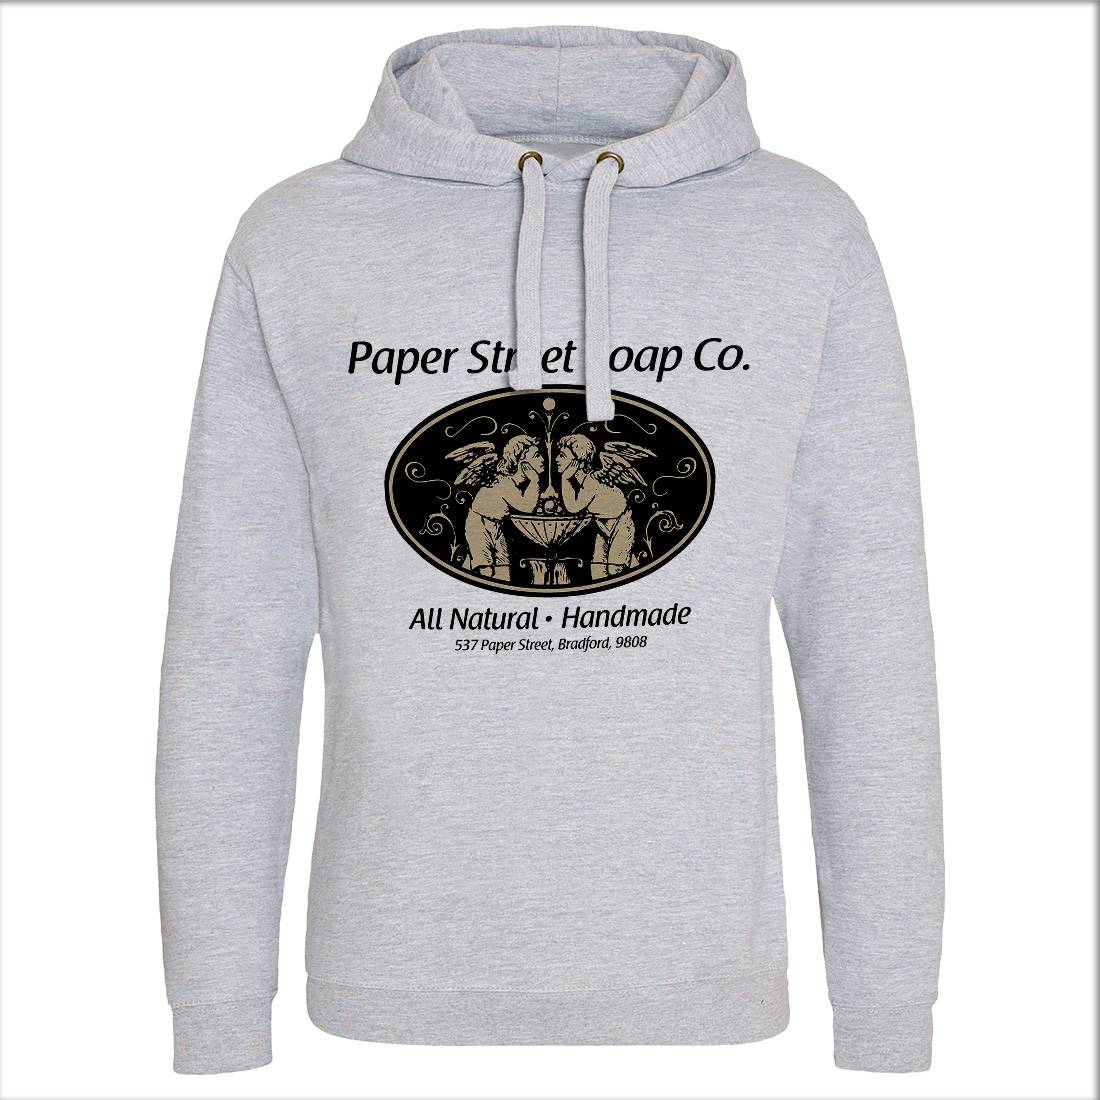 Paper Street Mens Hoodie Without Pocket Sport D300